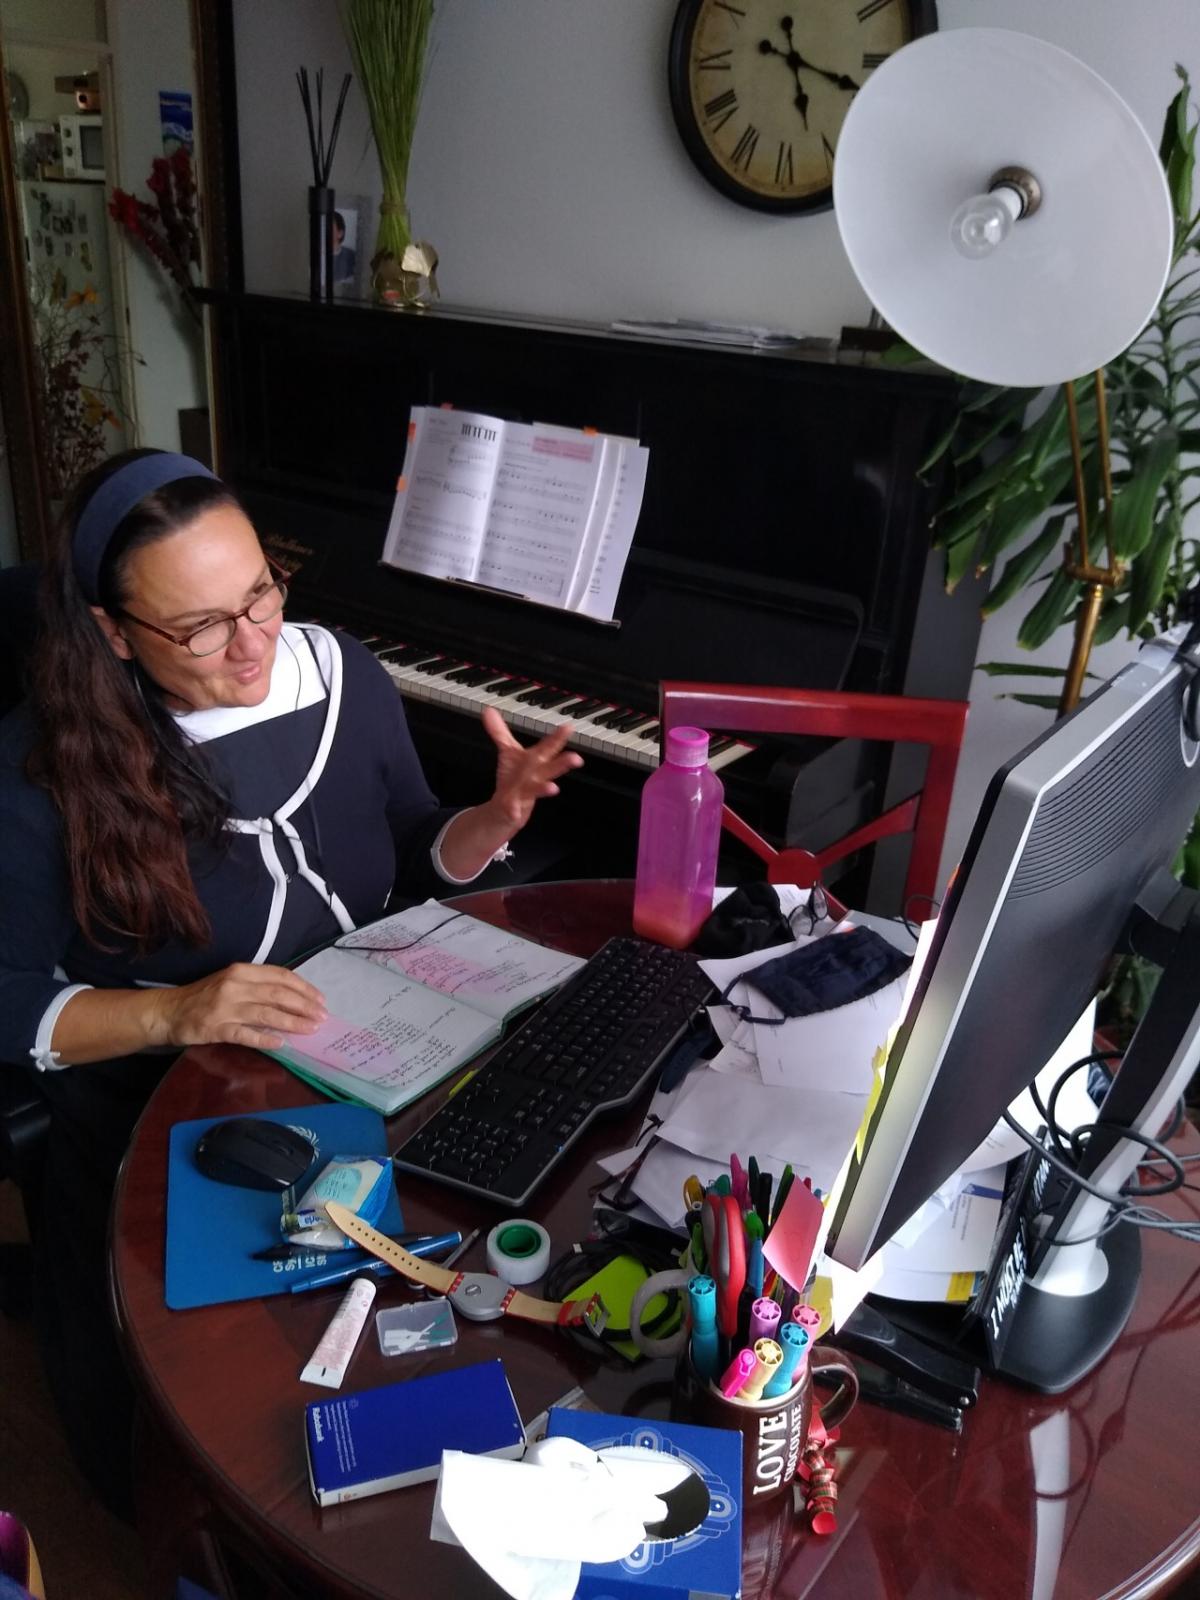 From her living room in a town not far from The Hague, Violeta is still connecting affected communities to the Court, despite the pandemic.